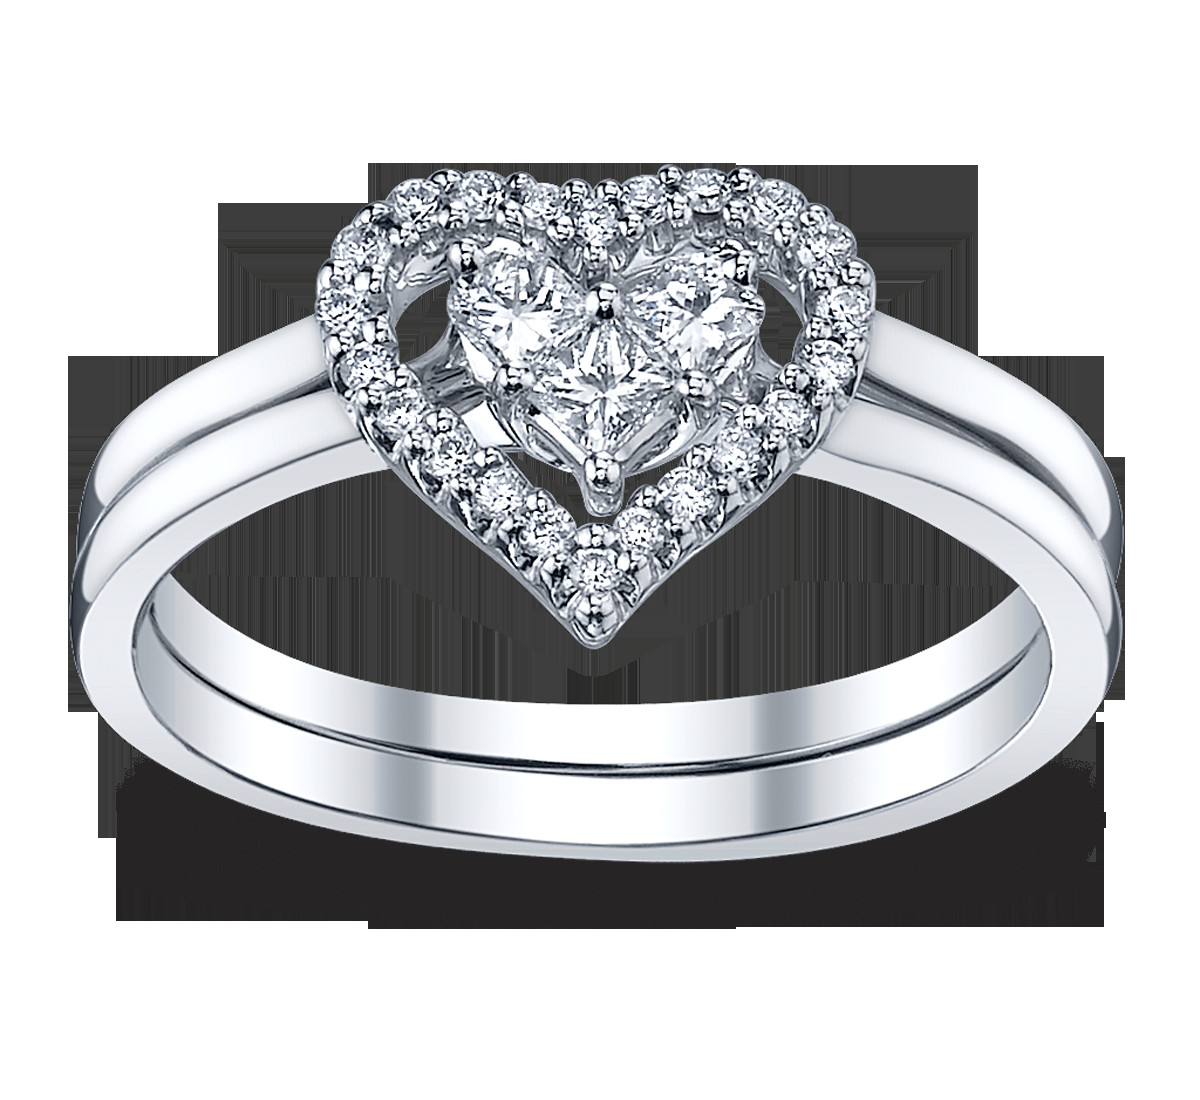 Www Wedding Rings
 4 Perfect Heart & Bow Diamond Engagement Rings for the